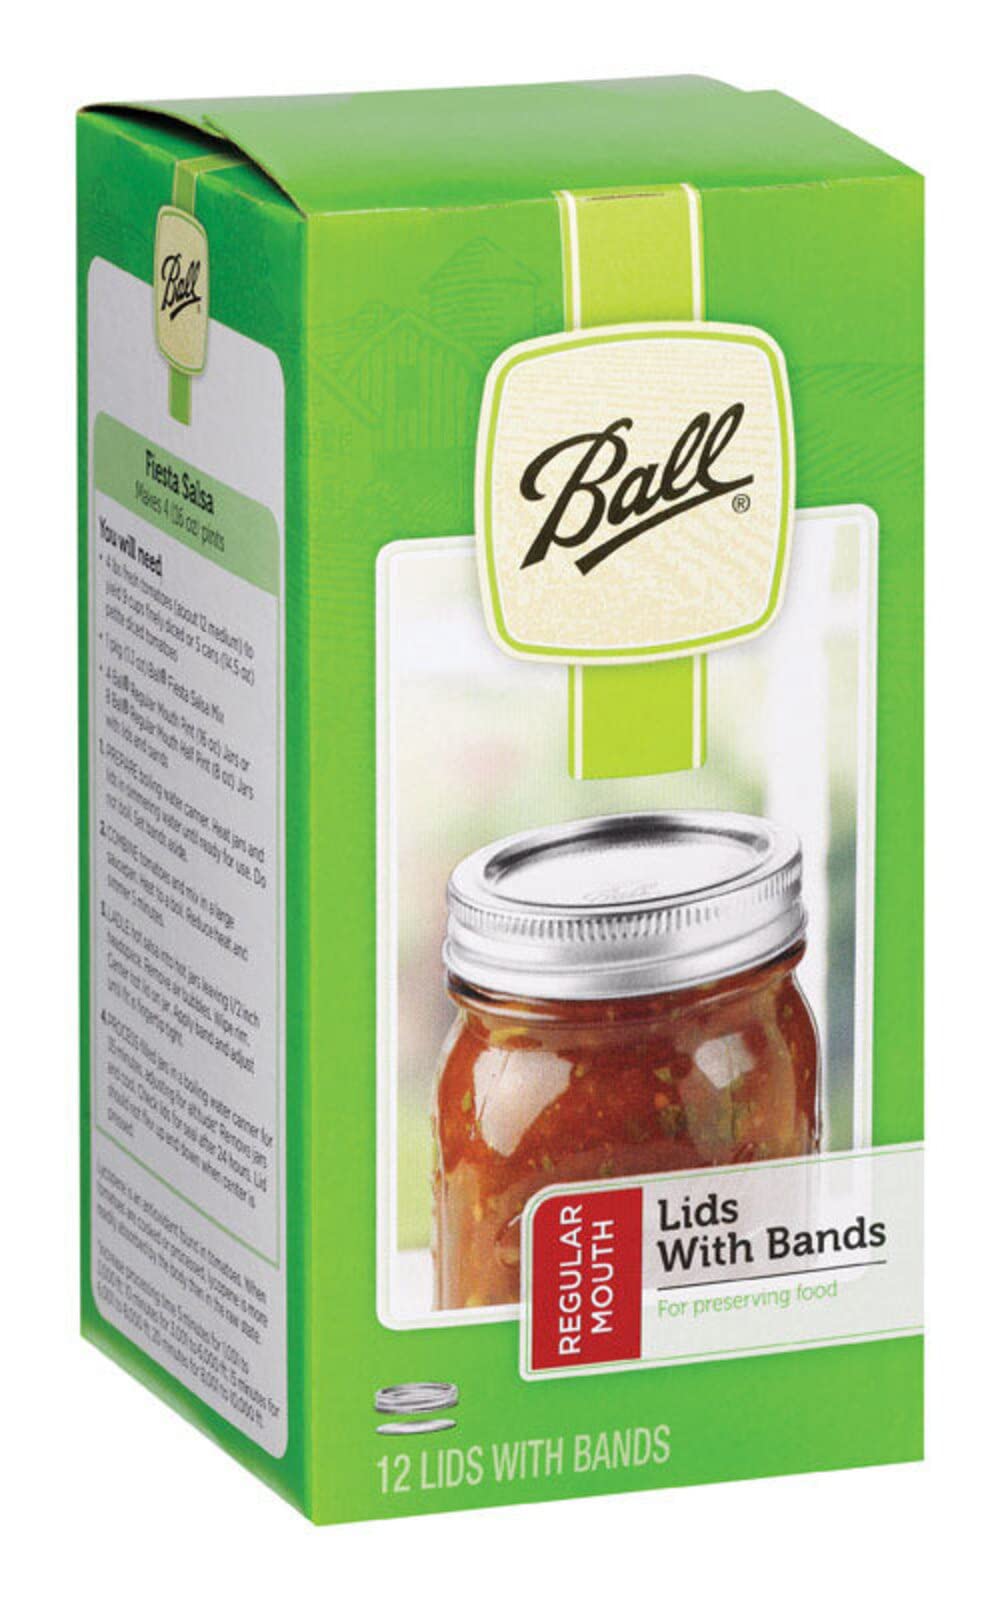 Ball Regular Mouth Canning Lids and Bands 12 pk - Total Qty: 10; Each Pack Qty: 12; Total Items Rec: 120